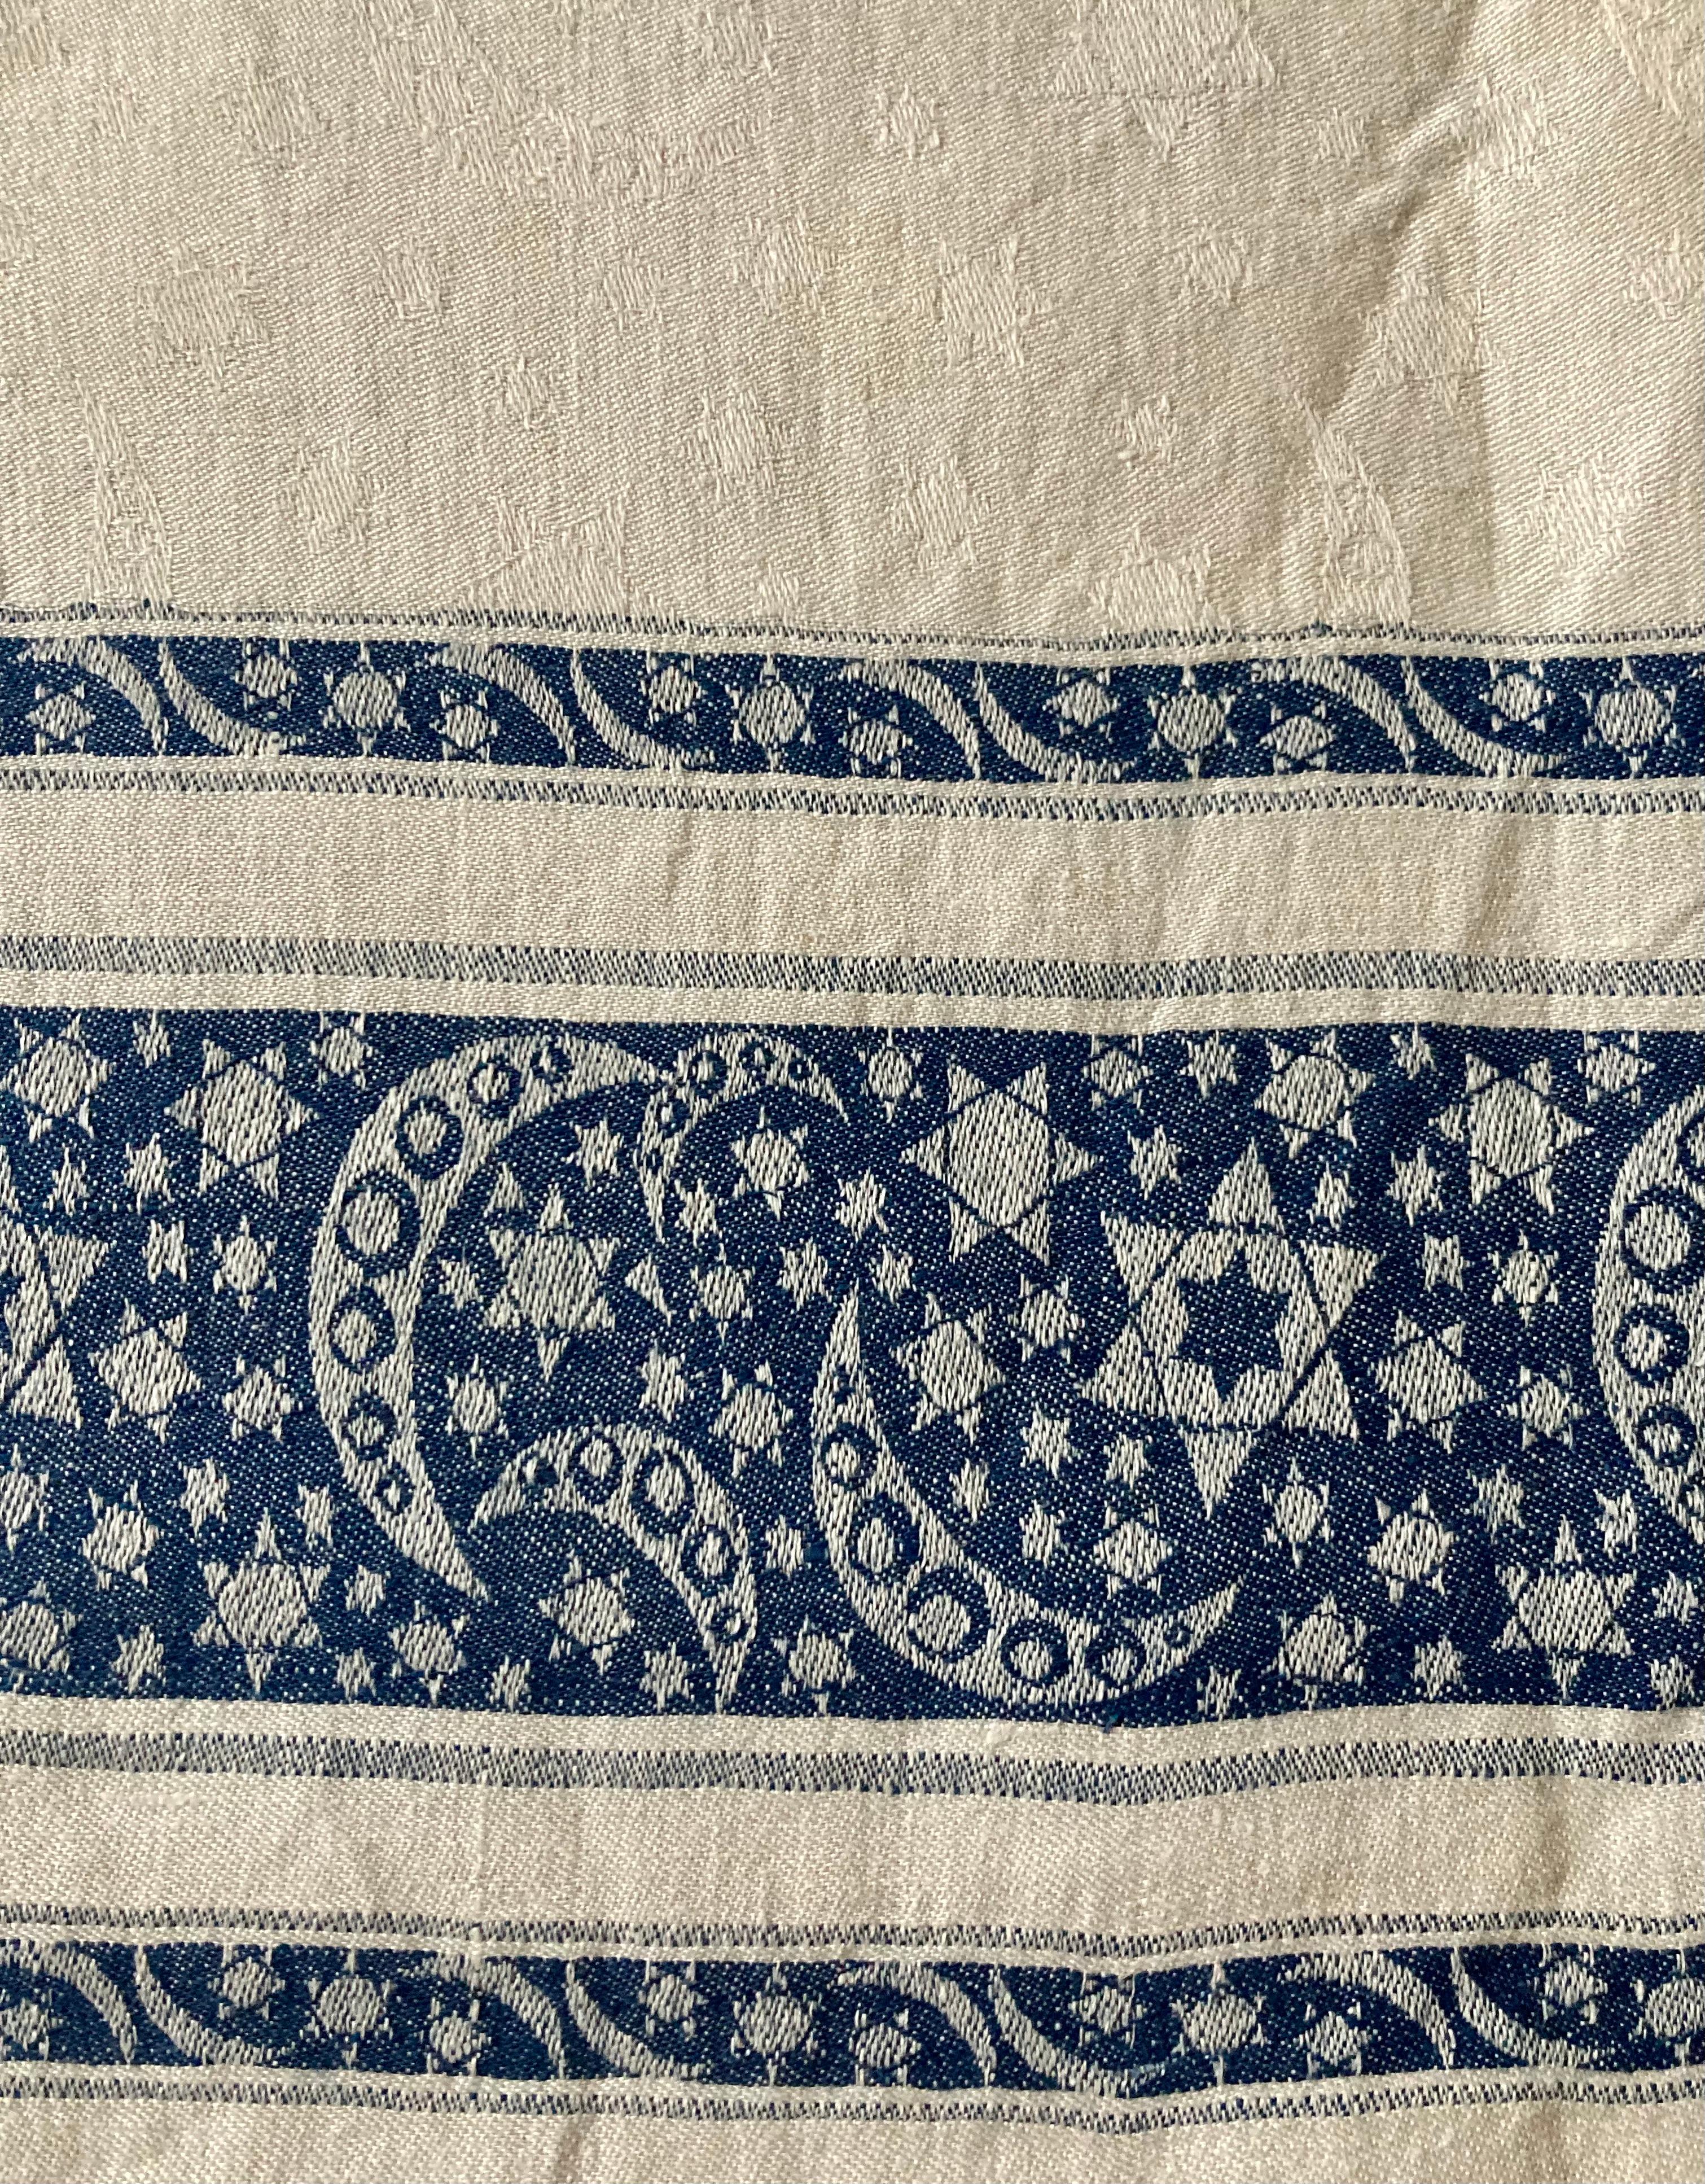 Linen Serviette 12 pieces / 1 plain white, 11 white with blue embroided, size 40x40 cm, Linen table cloth white and blue, linen, size 150x260 cm. Judaica, date probably beginning of the 20th Century.